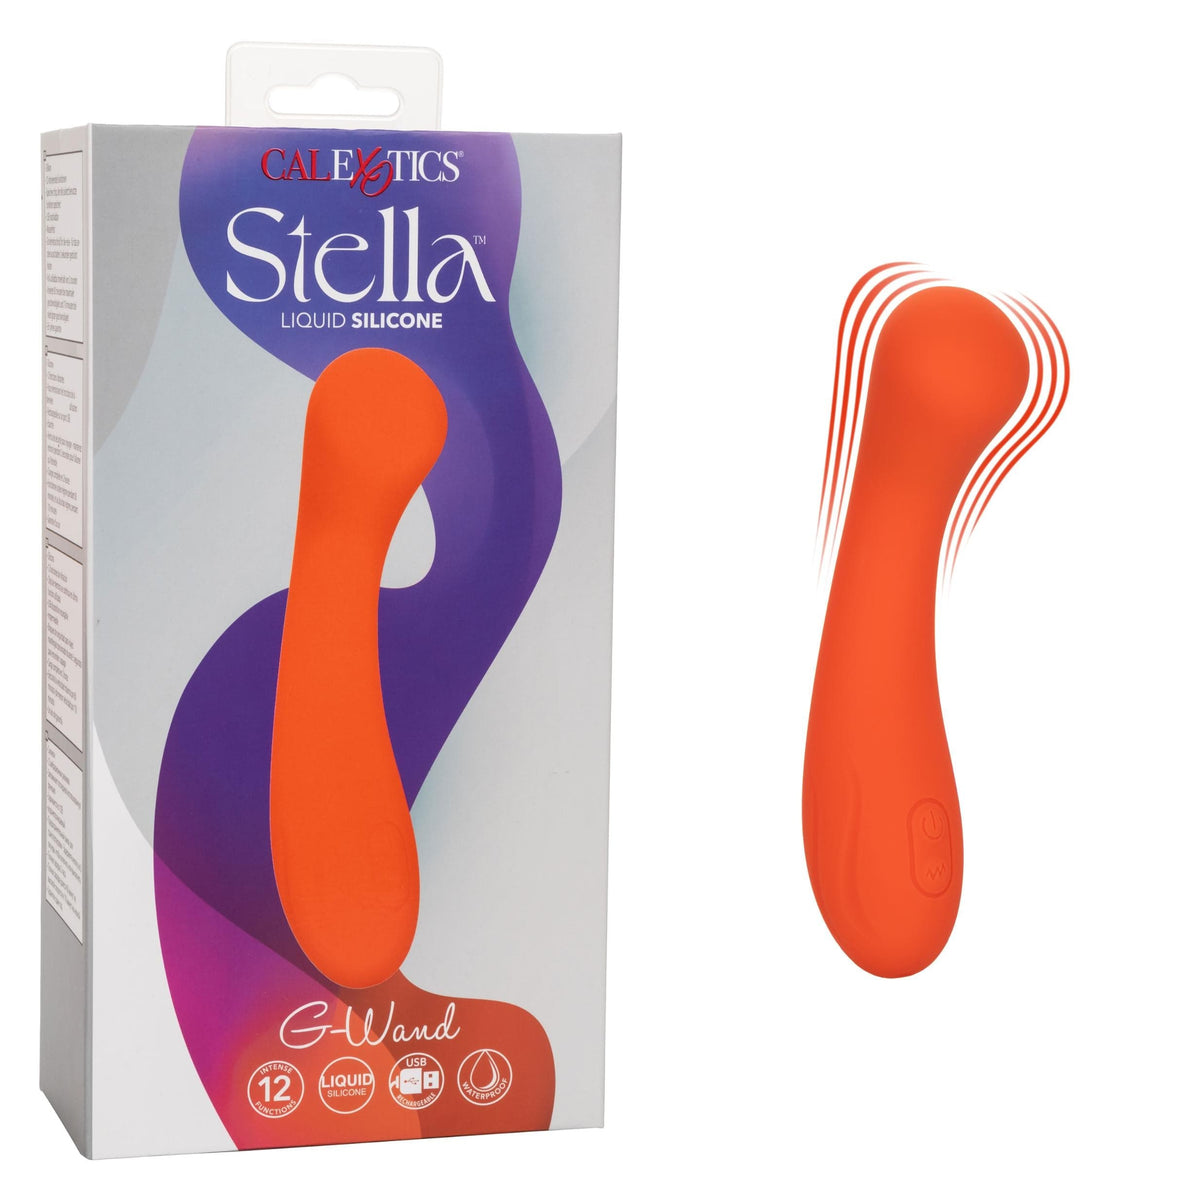 new sex toys, when is black friday 2022, how many days until black friday 2022